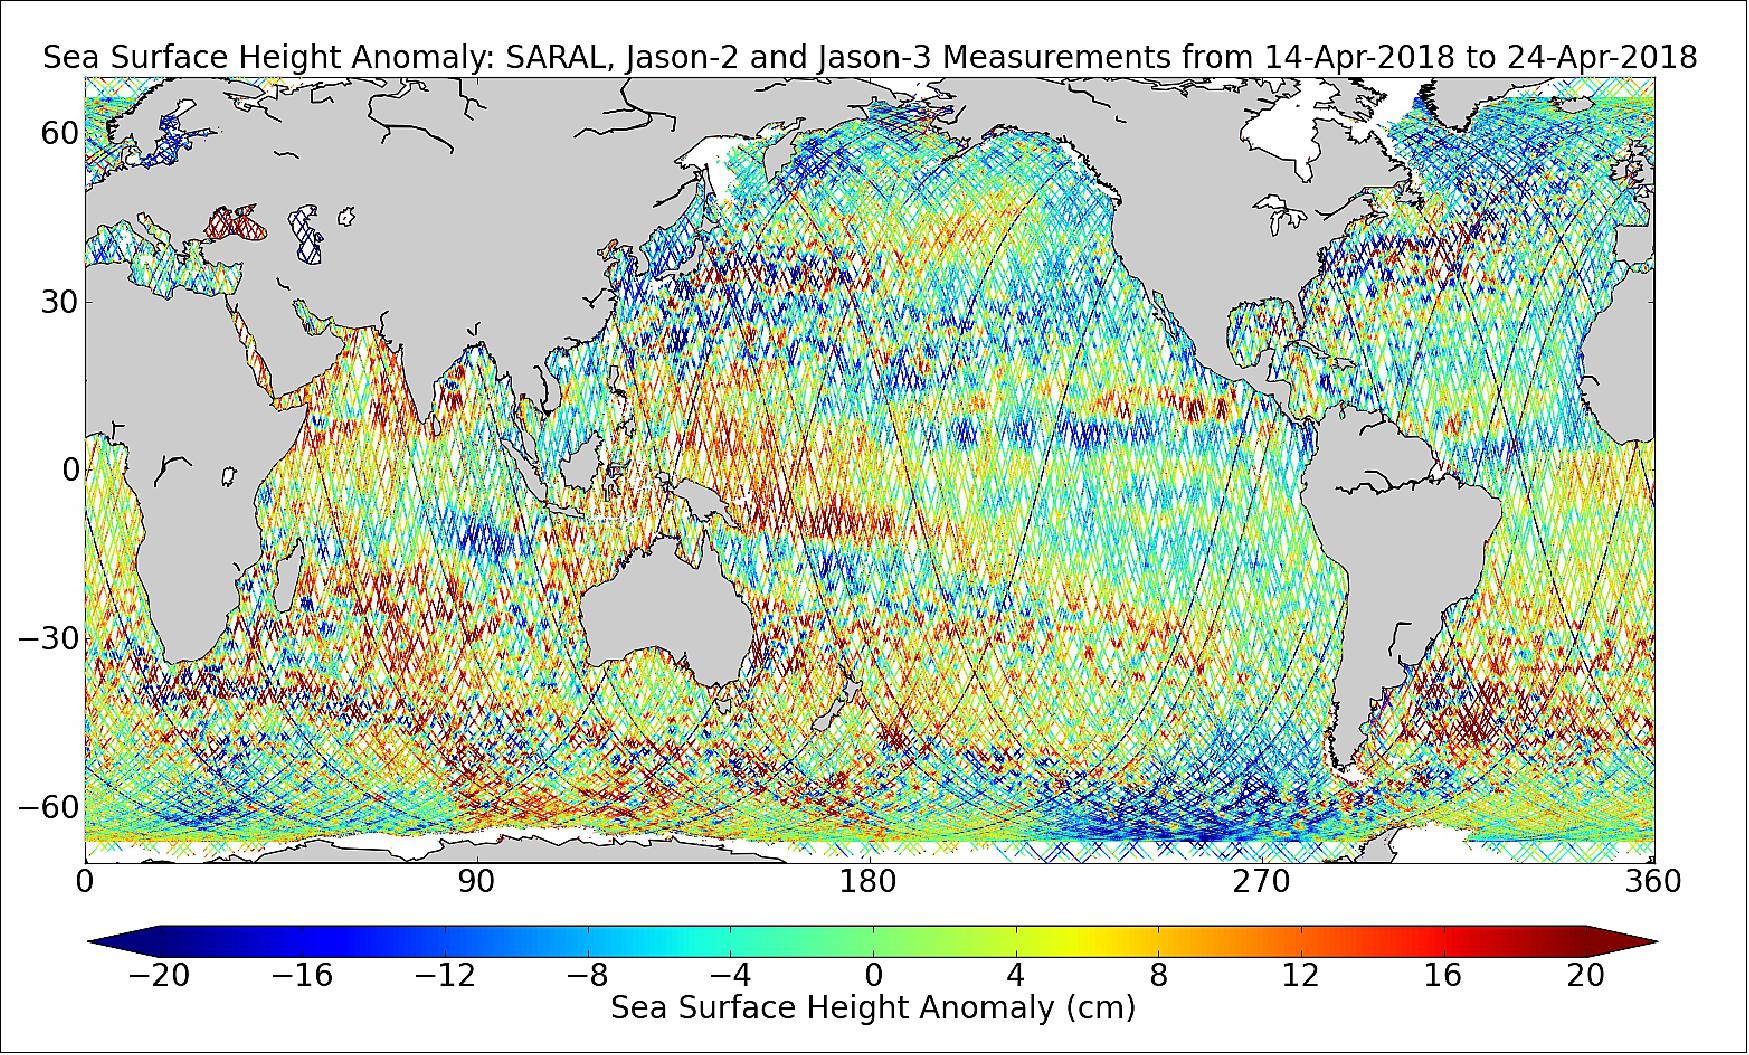 Figure 13: These maps show a daily sample of the along-track near-real-time (NRT) sea surface height anomaly (SSHA) measurements from SARAL and the Jason-2 satellite altimeter mission. The seasonal cycle and trend have not been removed. Each map is generated from a 10-day window of SSHA measurements. The NRT SSHA measurements from these missions are typically available within 5 to 7 hours of real time. These measurements can be used for meteorological applications (i.e. weather), marine operations (i.e. fishing, boating, offshore operations), and other applications where knowledge of current ocean conditions are relevant.